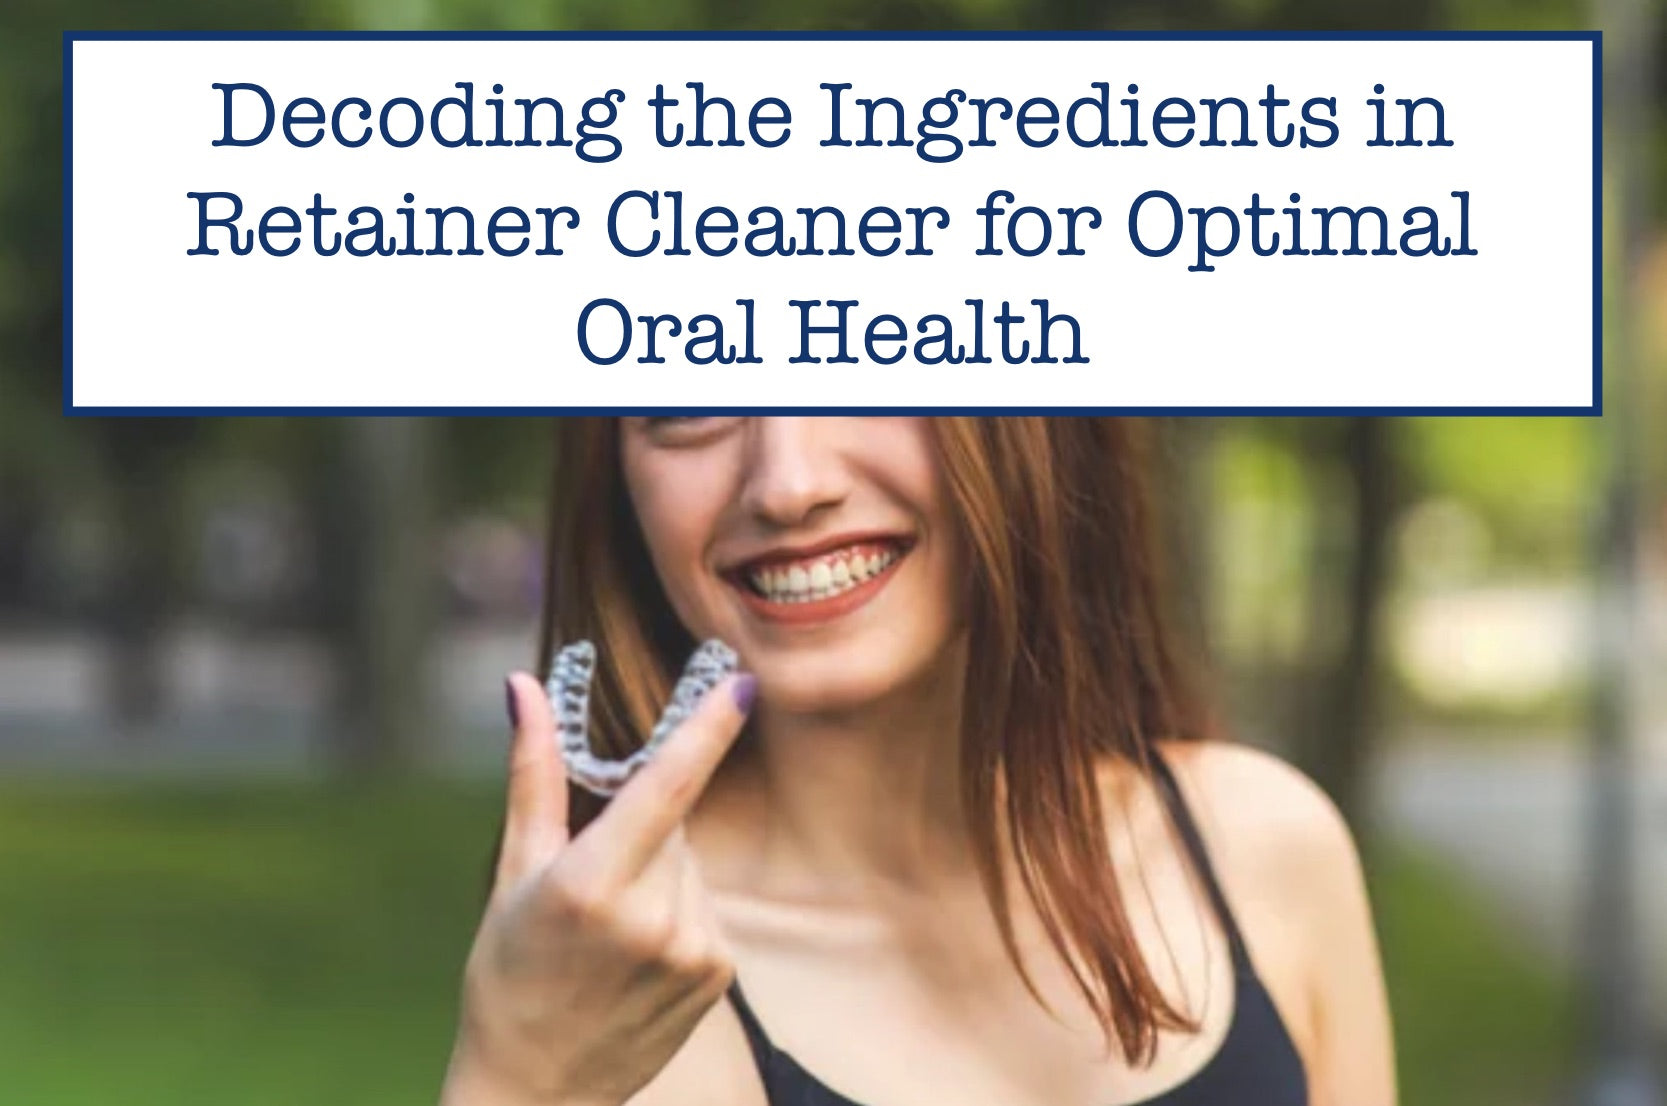 Decoding the Ingredients in Retainer Cleaner for Optimal Oral Health